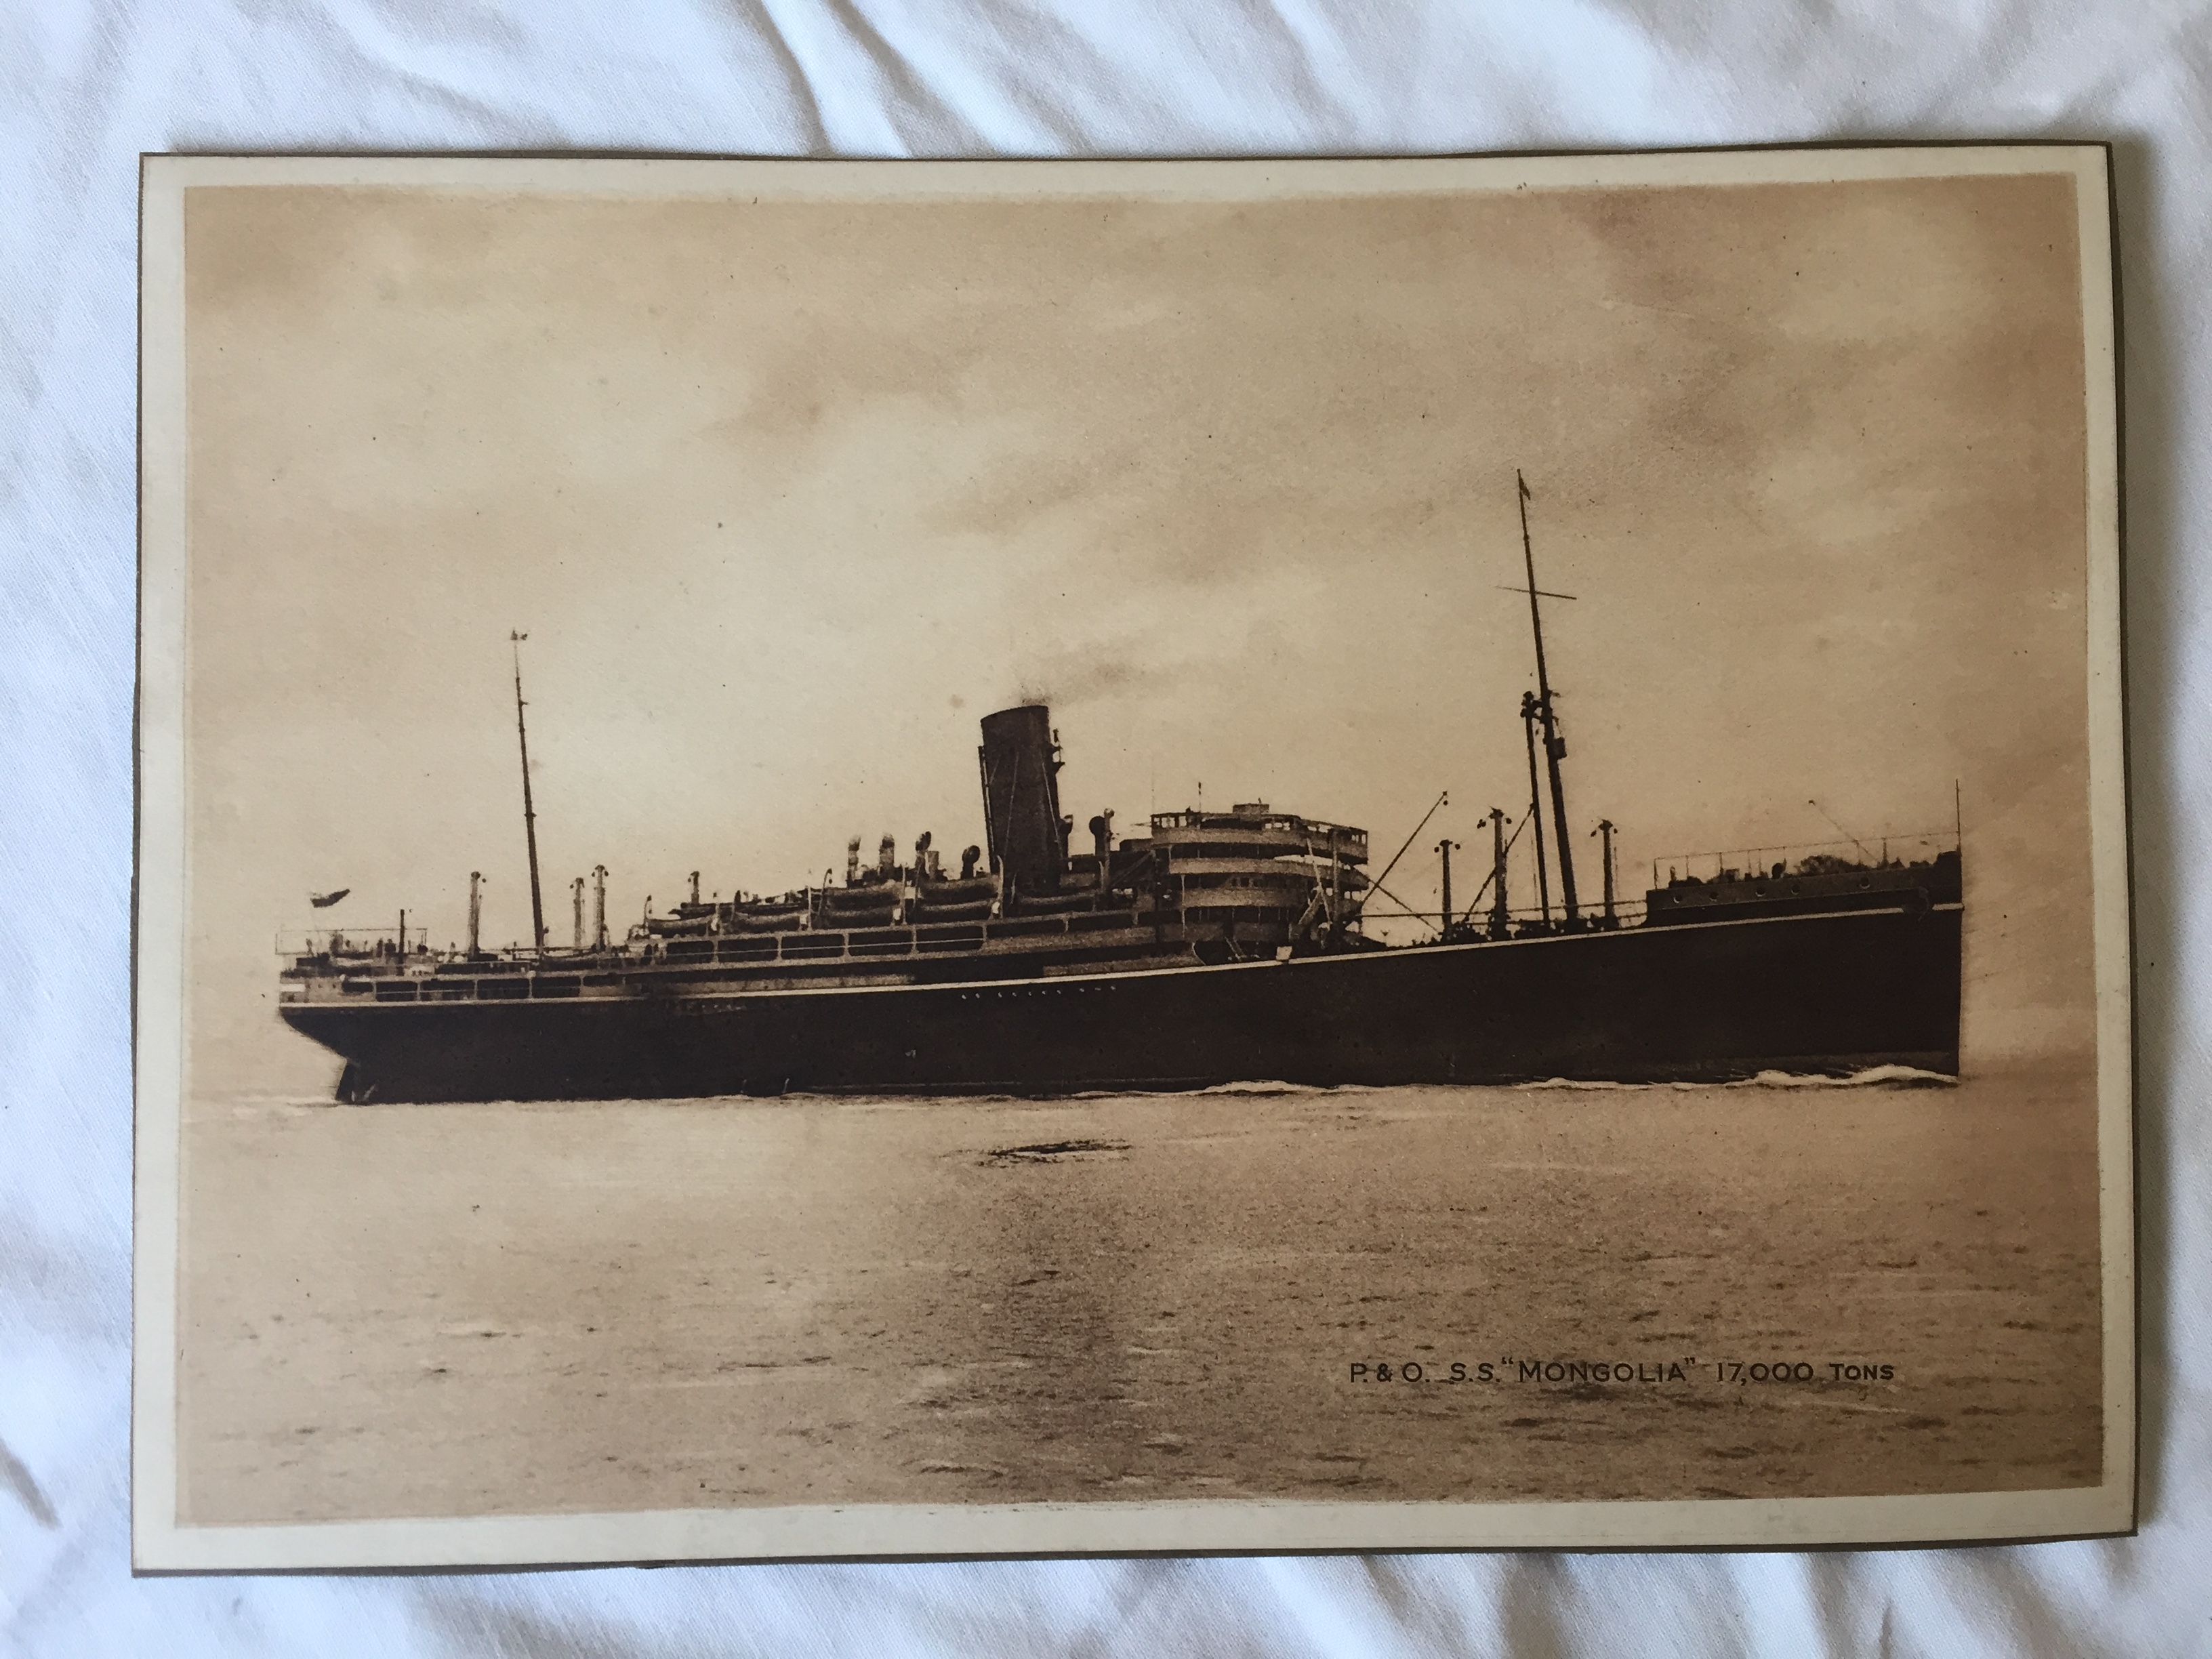 EARLY PHOTOGRAPH FROM THE VESSEL THE SS MONGOLIA